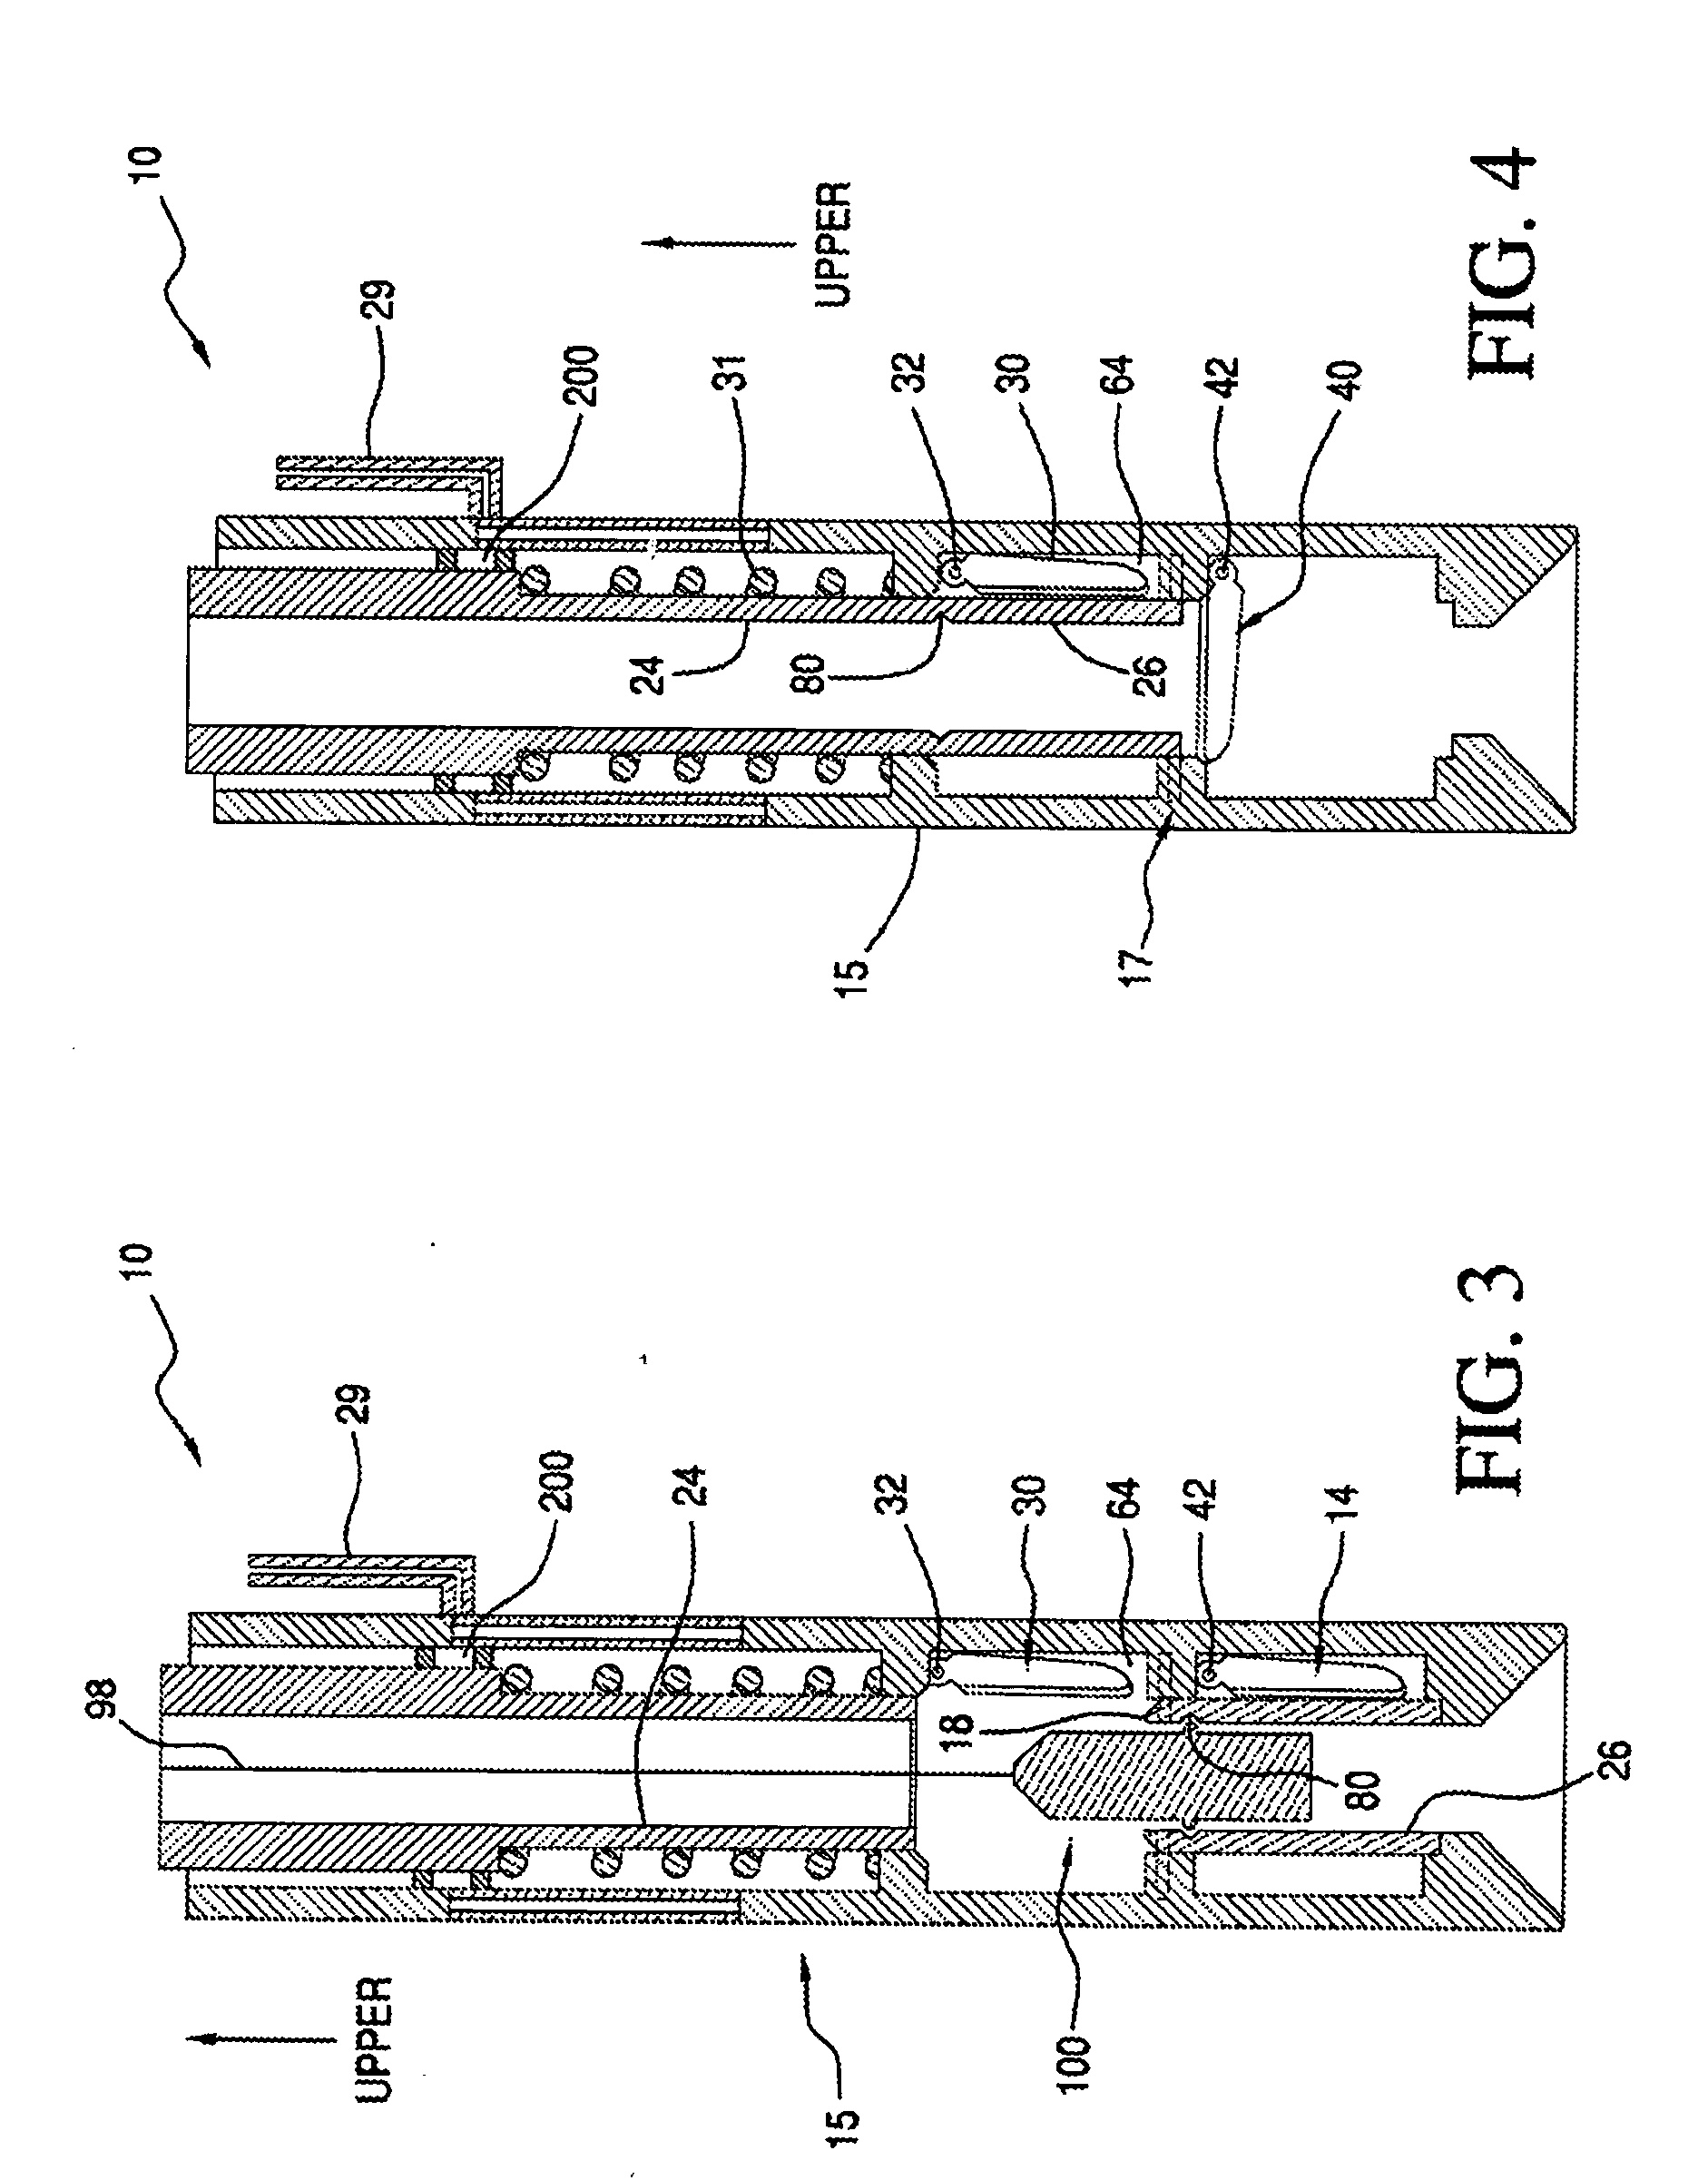 Surface controlled subsurface safety valve assembly with primary and secondary valves